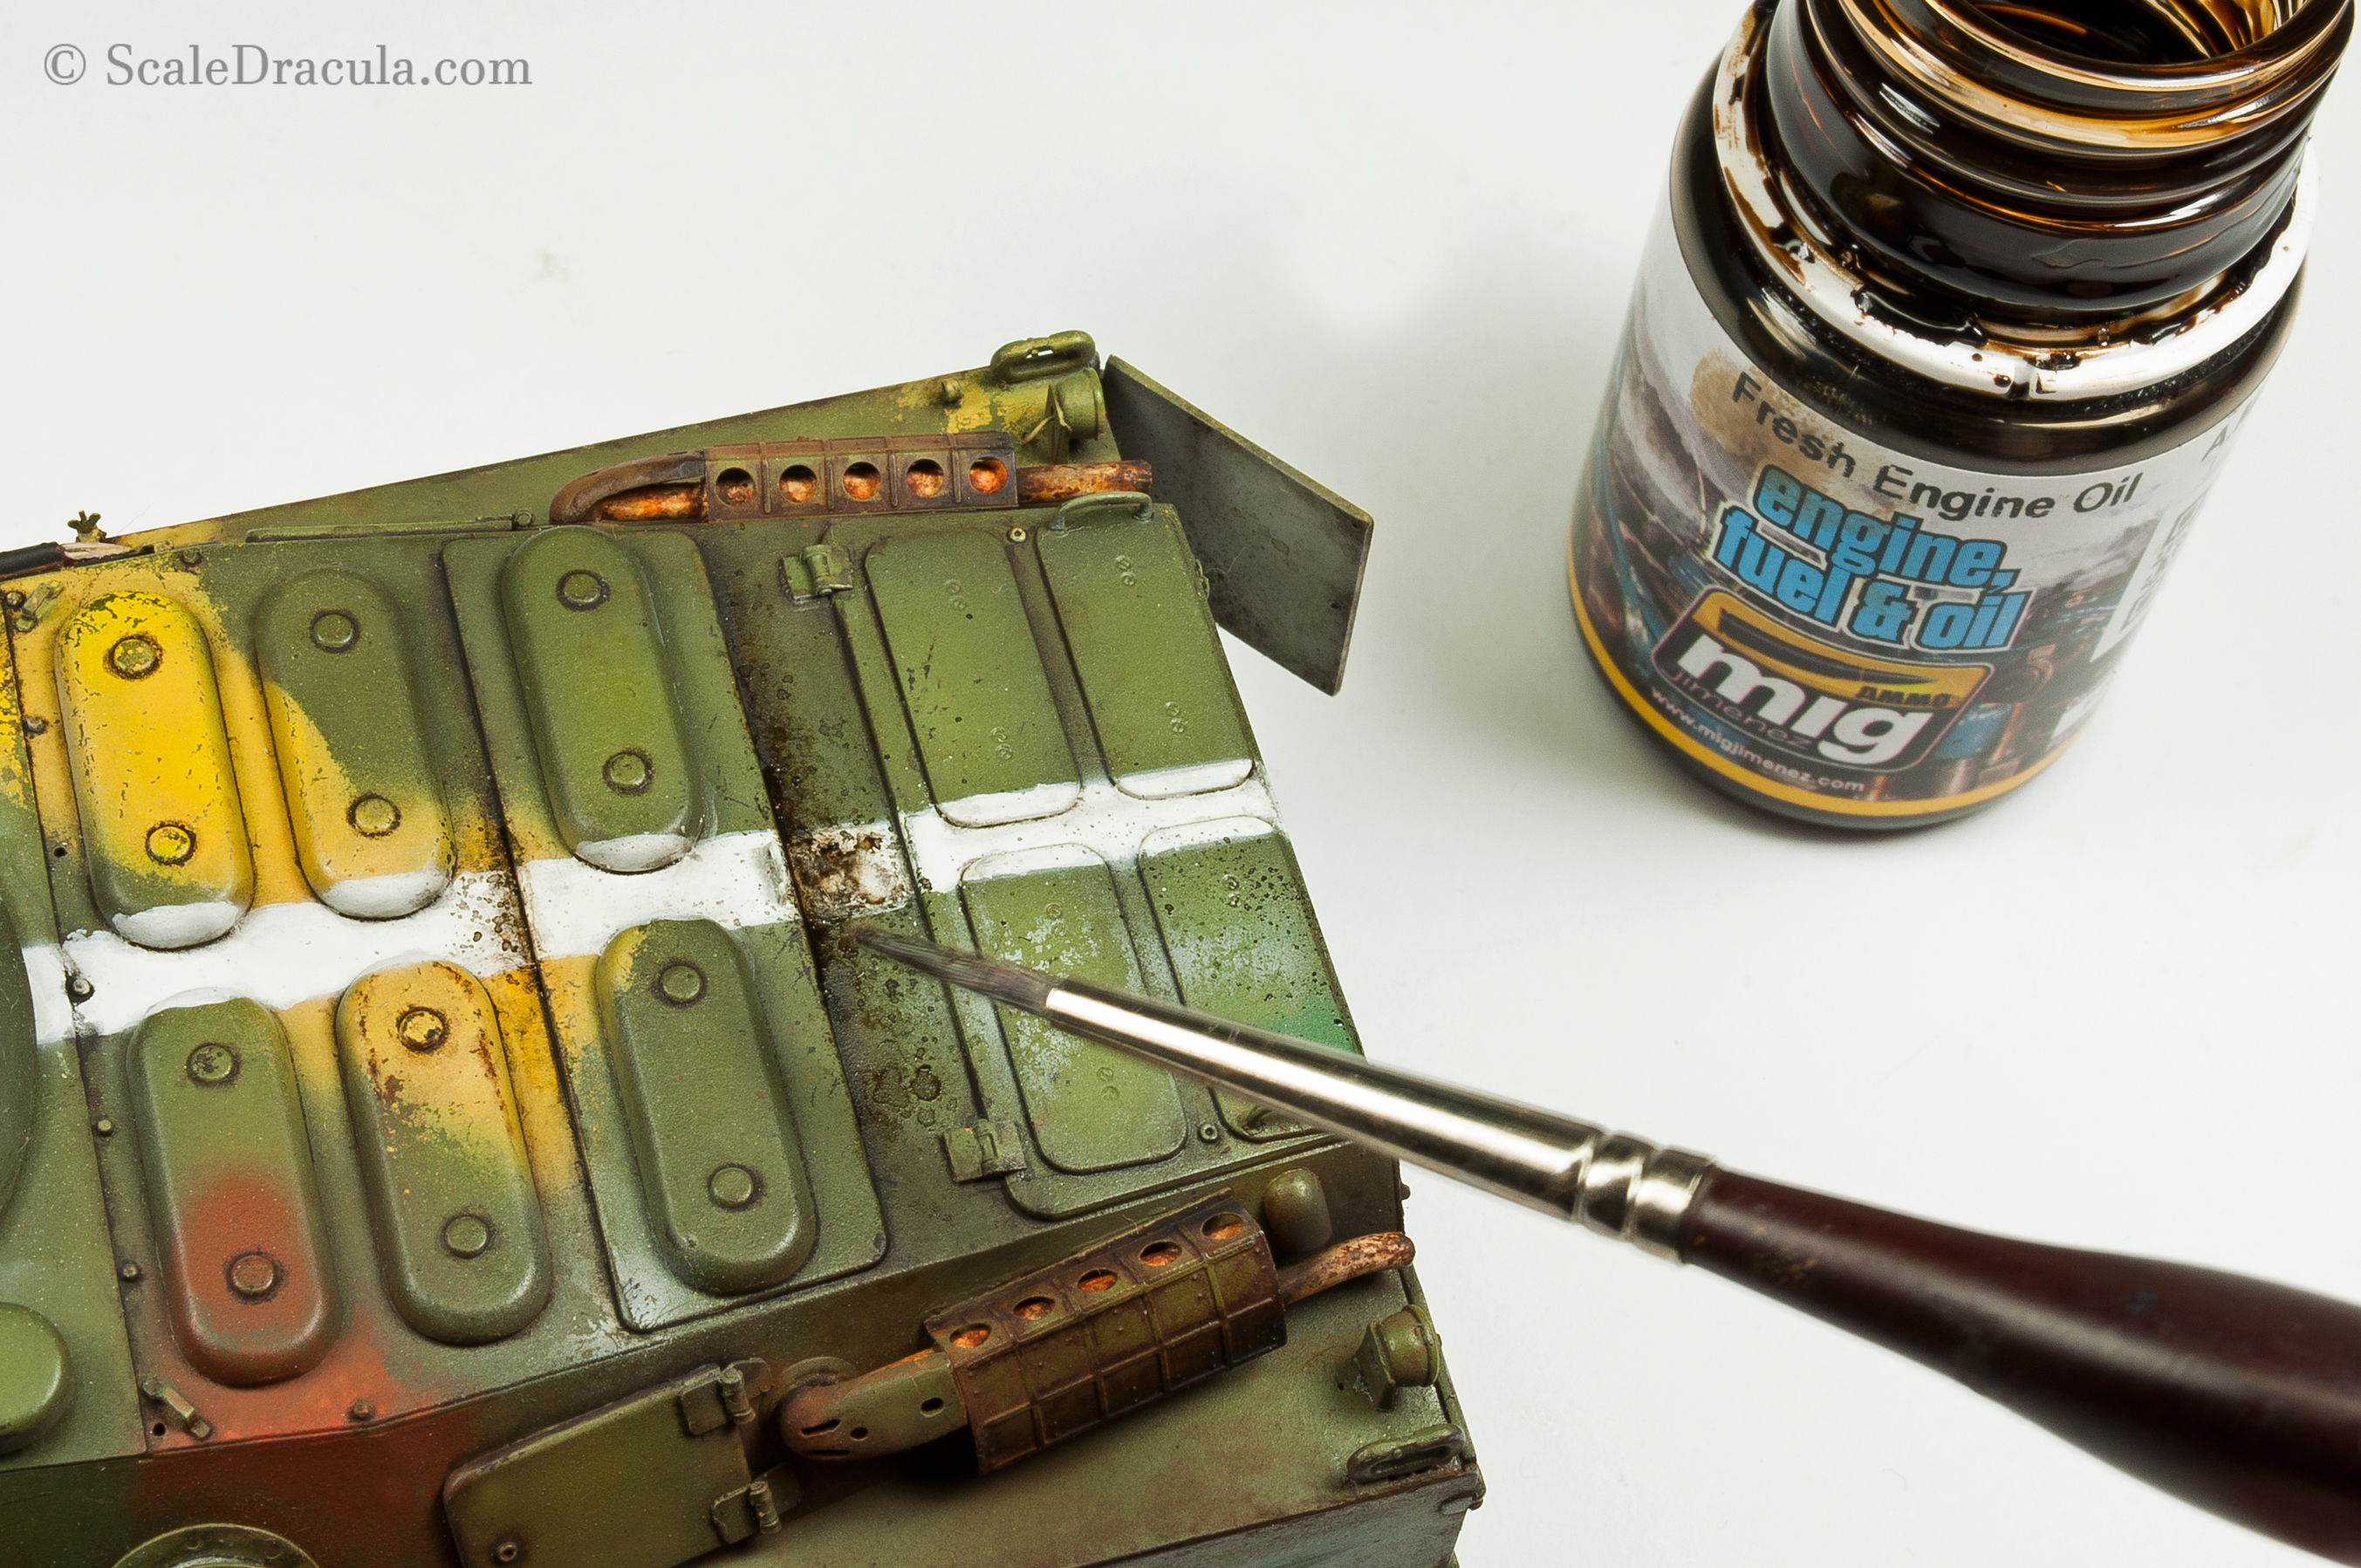 Greasy oil effects with Ammo Fresh Engine Oil, BRDM-2 by Trumpeter